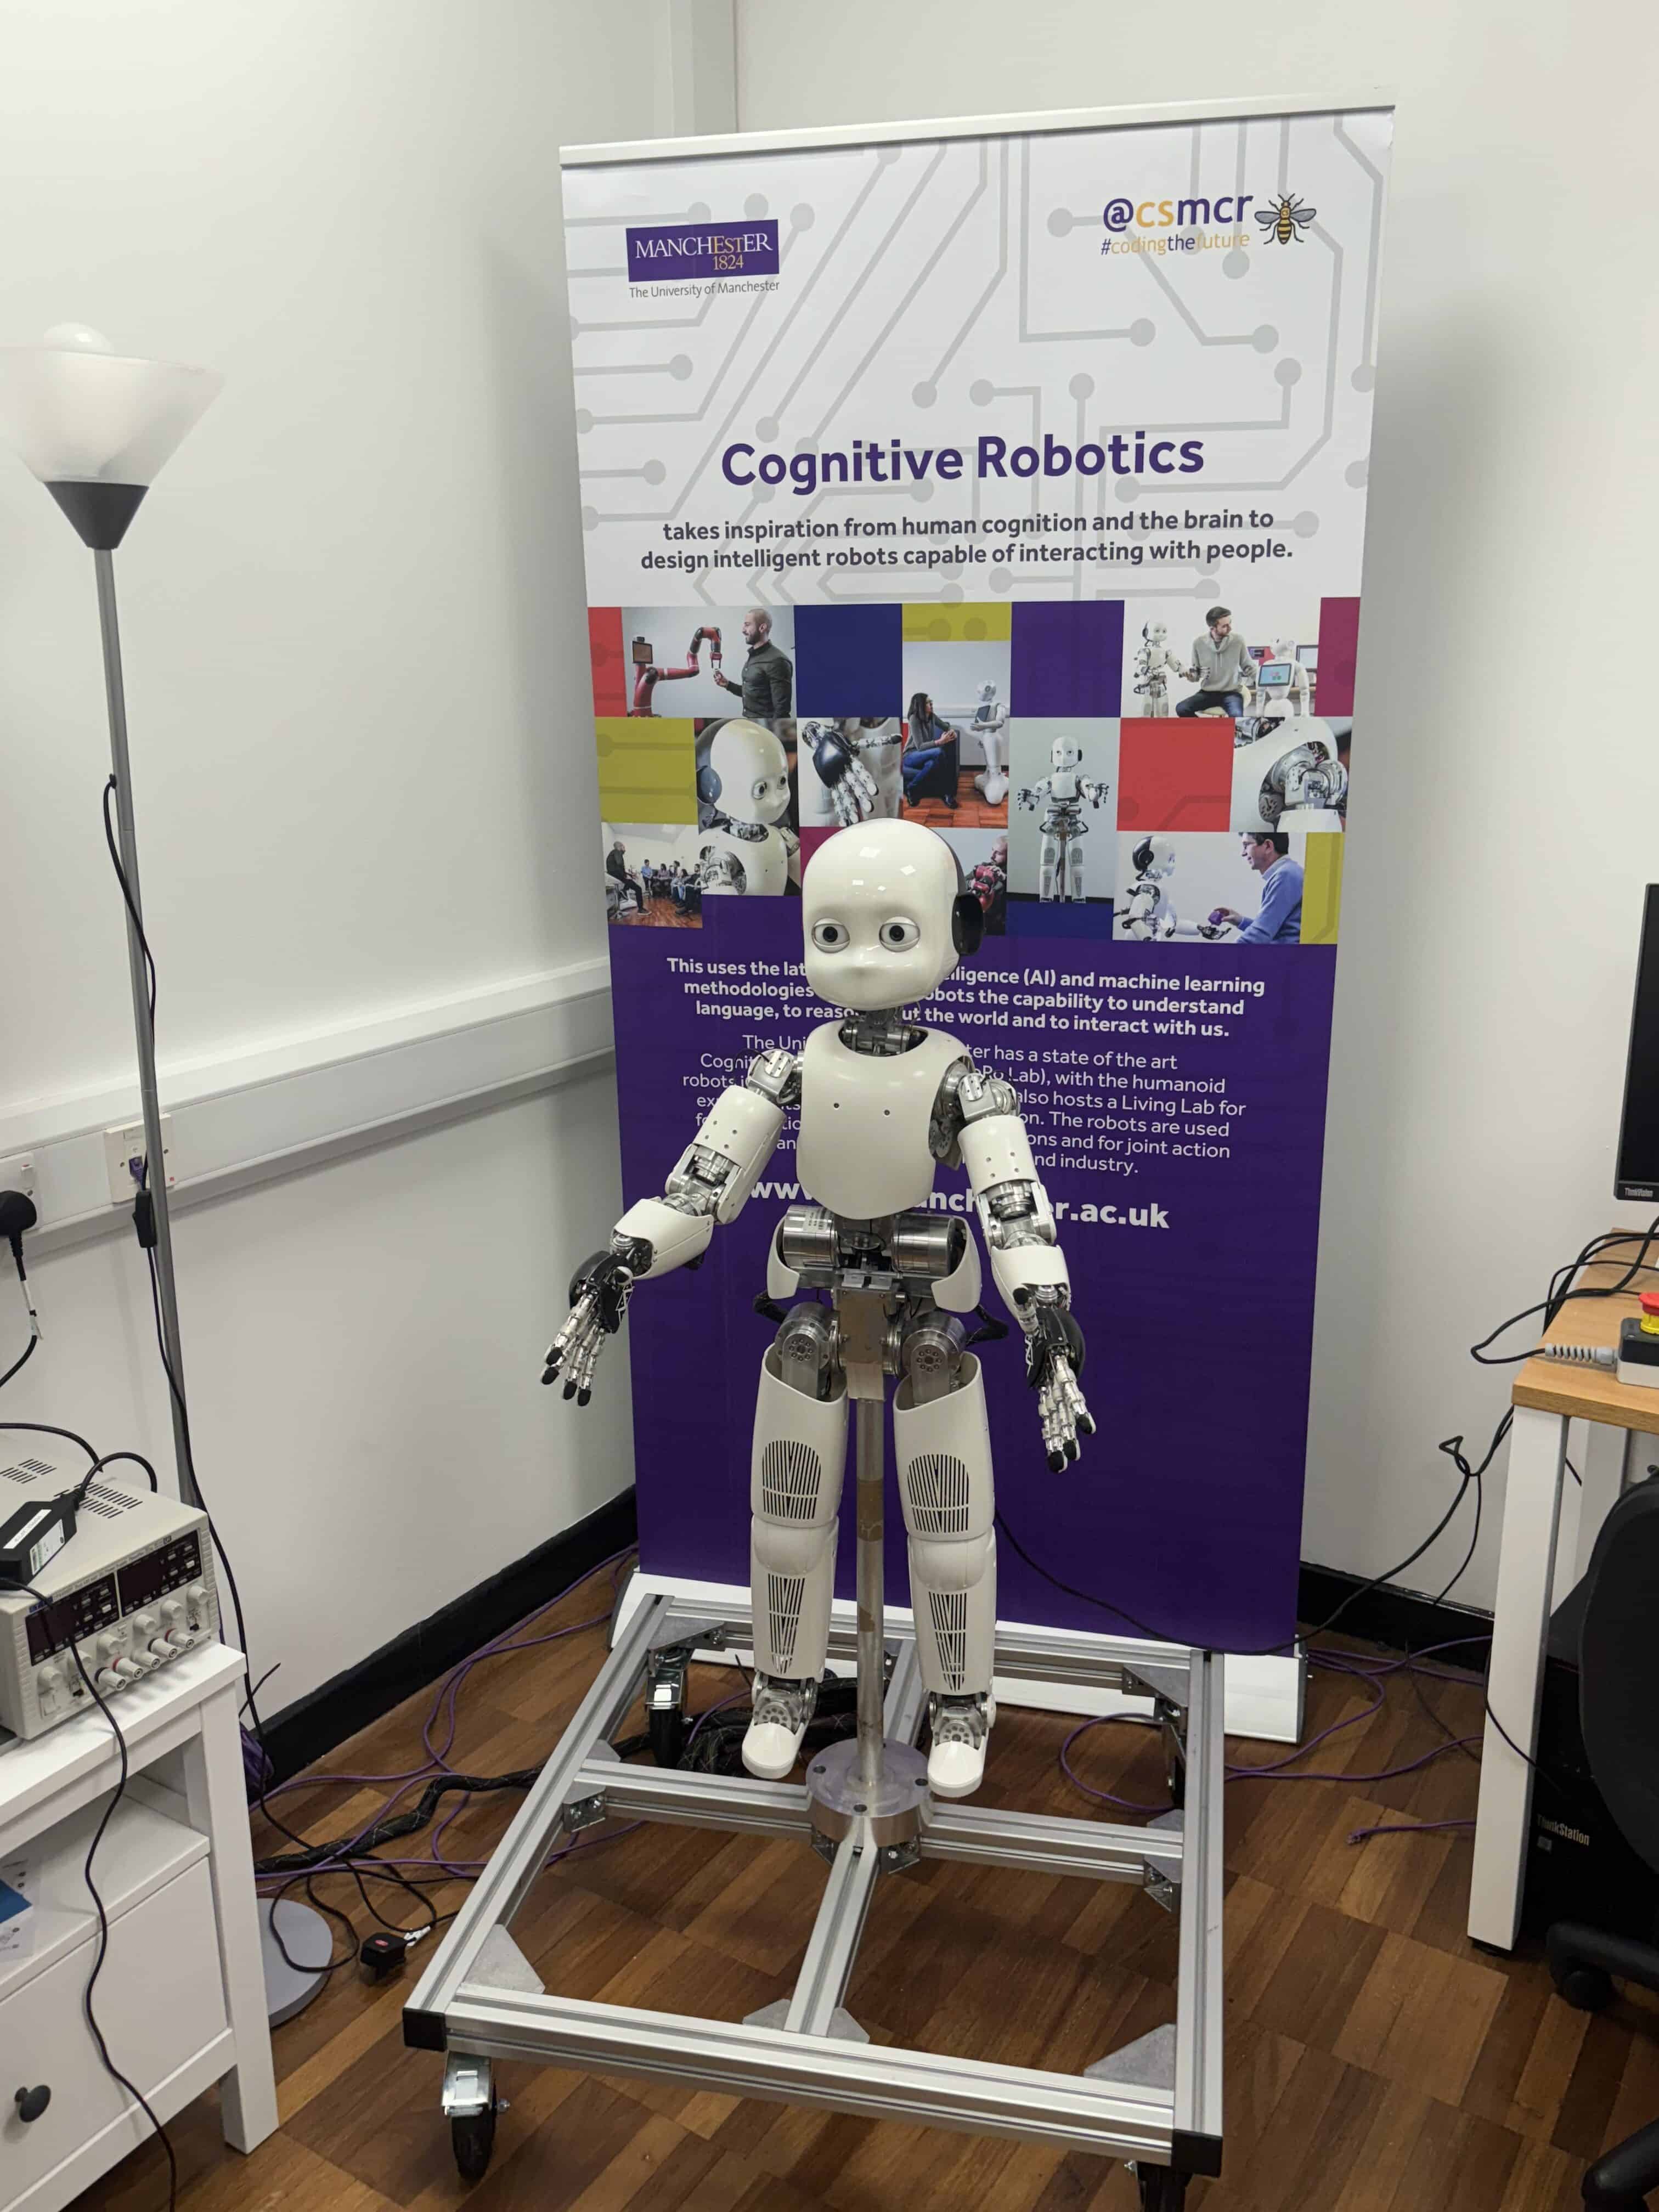 A robot in front of a banner about Cognitive Robotics at the University of Manchester during a trip for Laurus Ryecroft students.